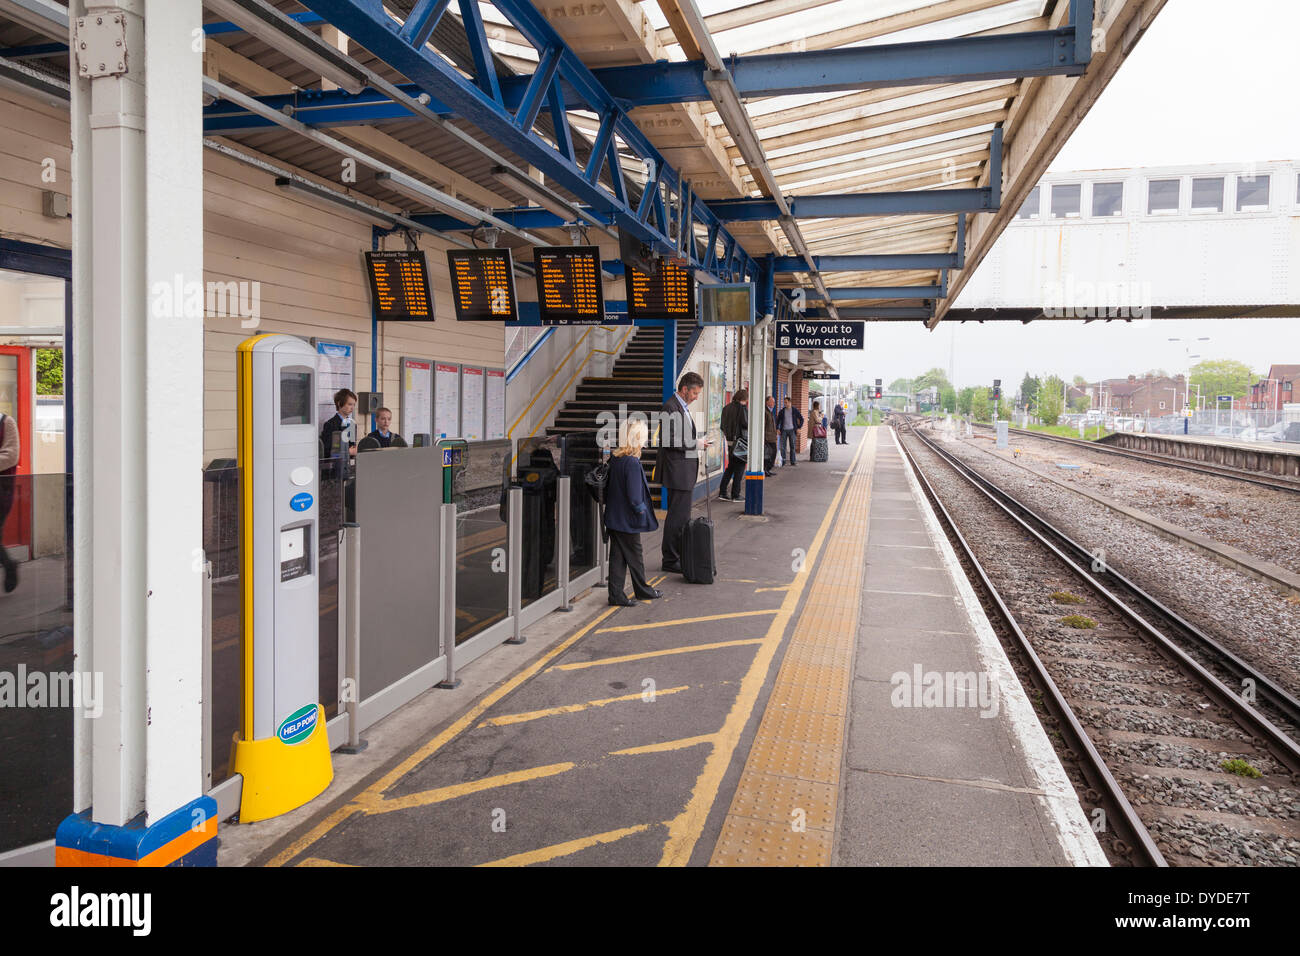 Passengers waiting for a train on a station platform. Stock Photo